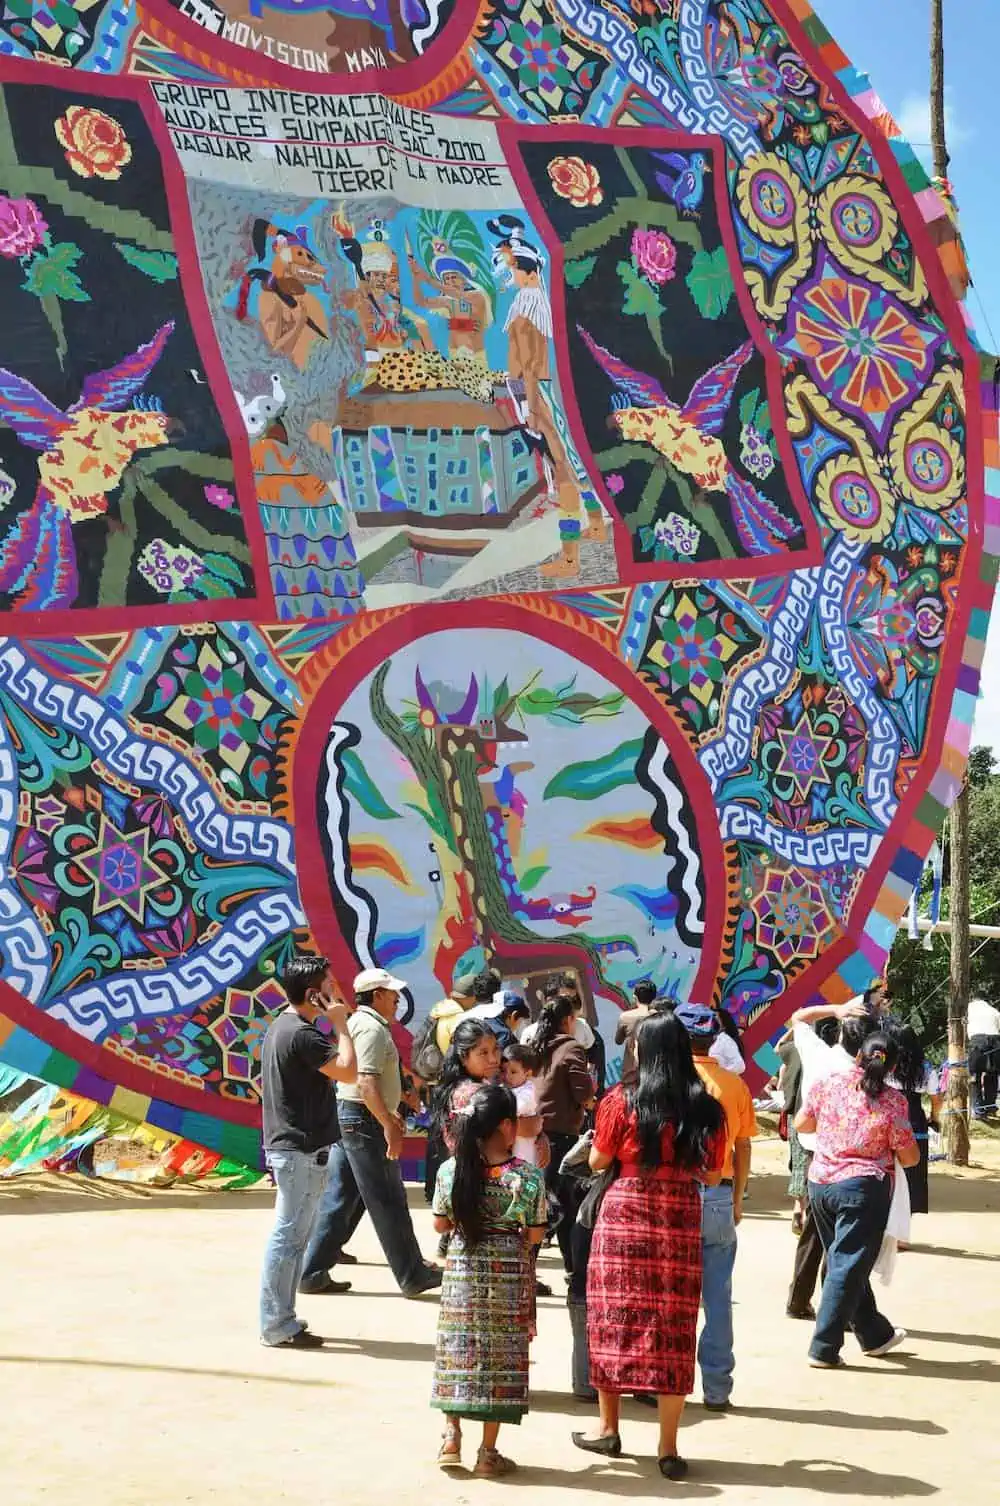 Giant kites on Day of the Dead in Guatemala.